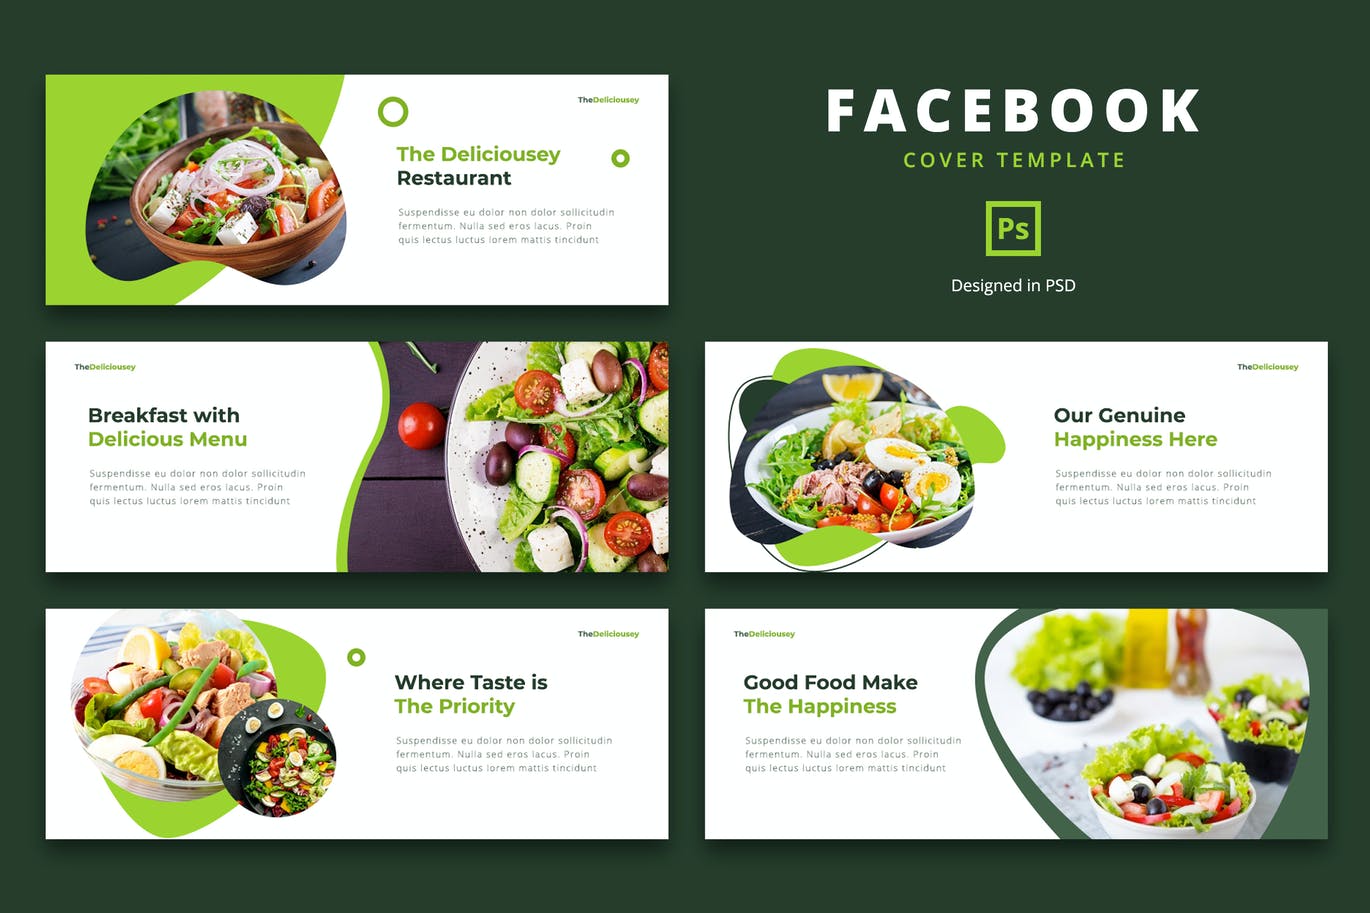 Facebook Cover Template Healthy Food